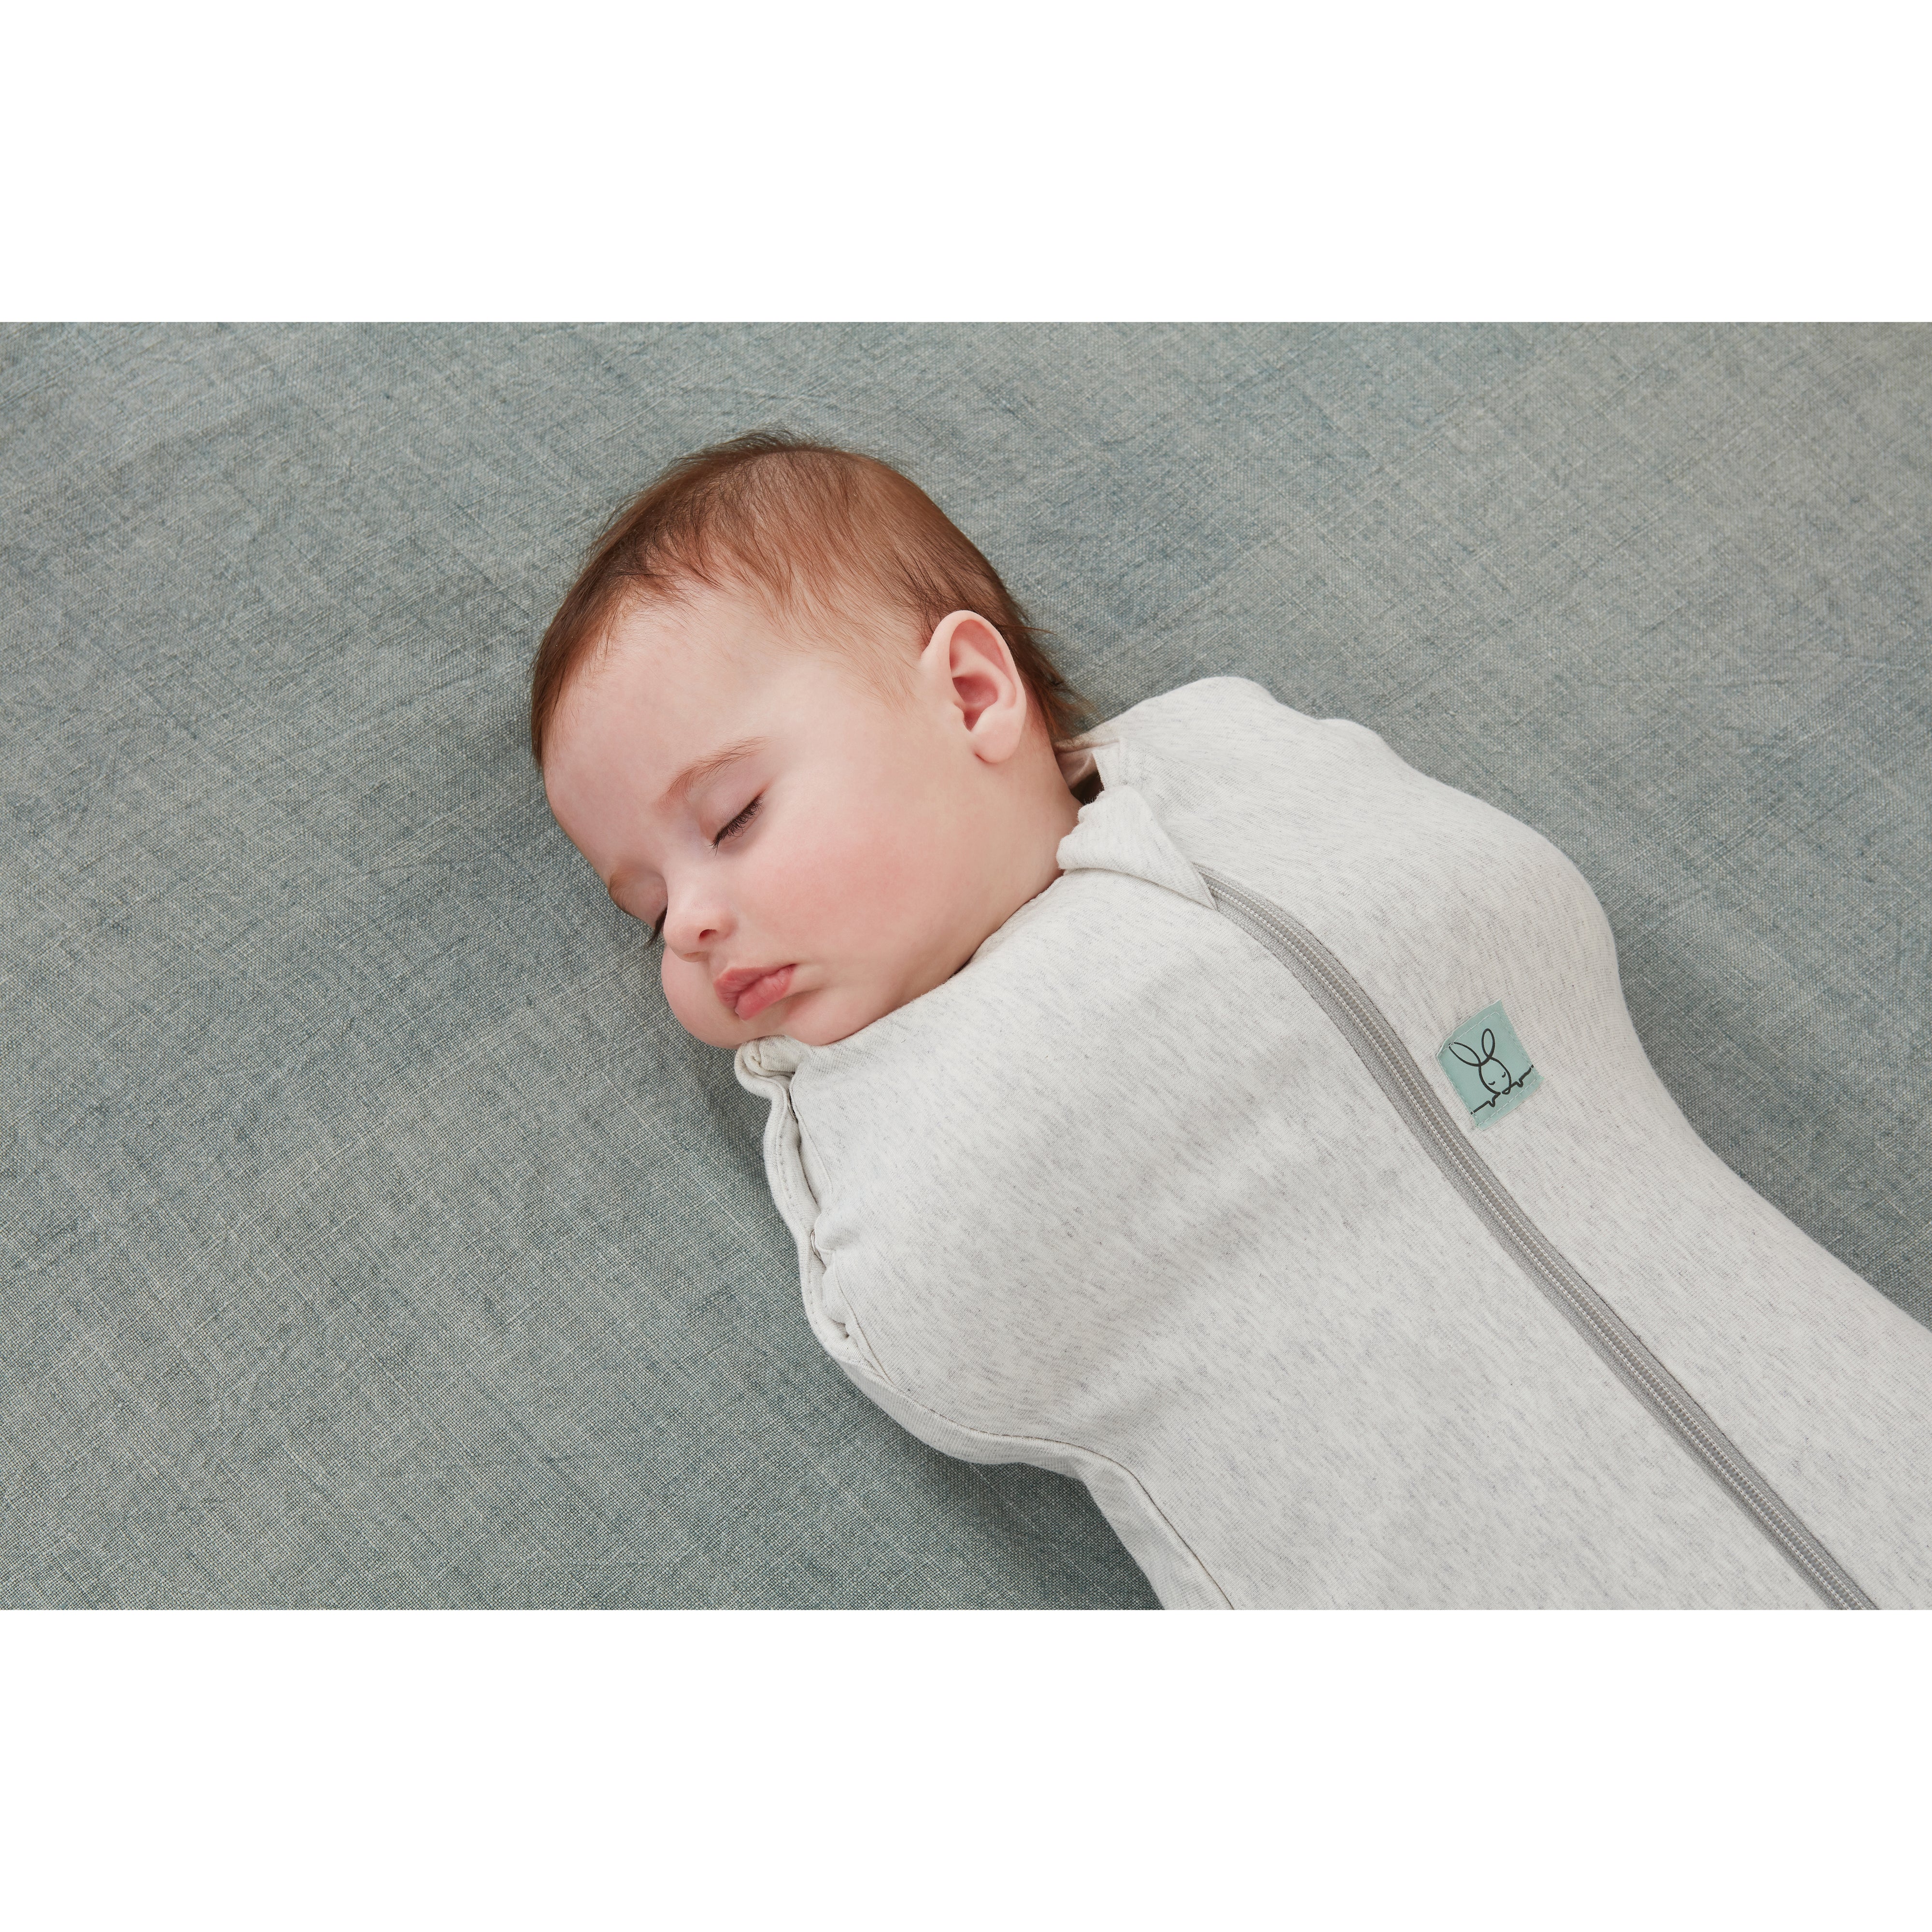 ergopouch-cocoon-swaddle-bag-0-2-tog-grey-marle-ergo-zepco-0-2t00-03mgm19- (14)